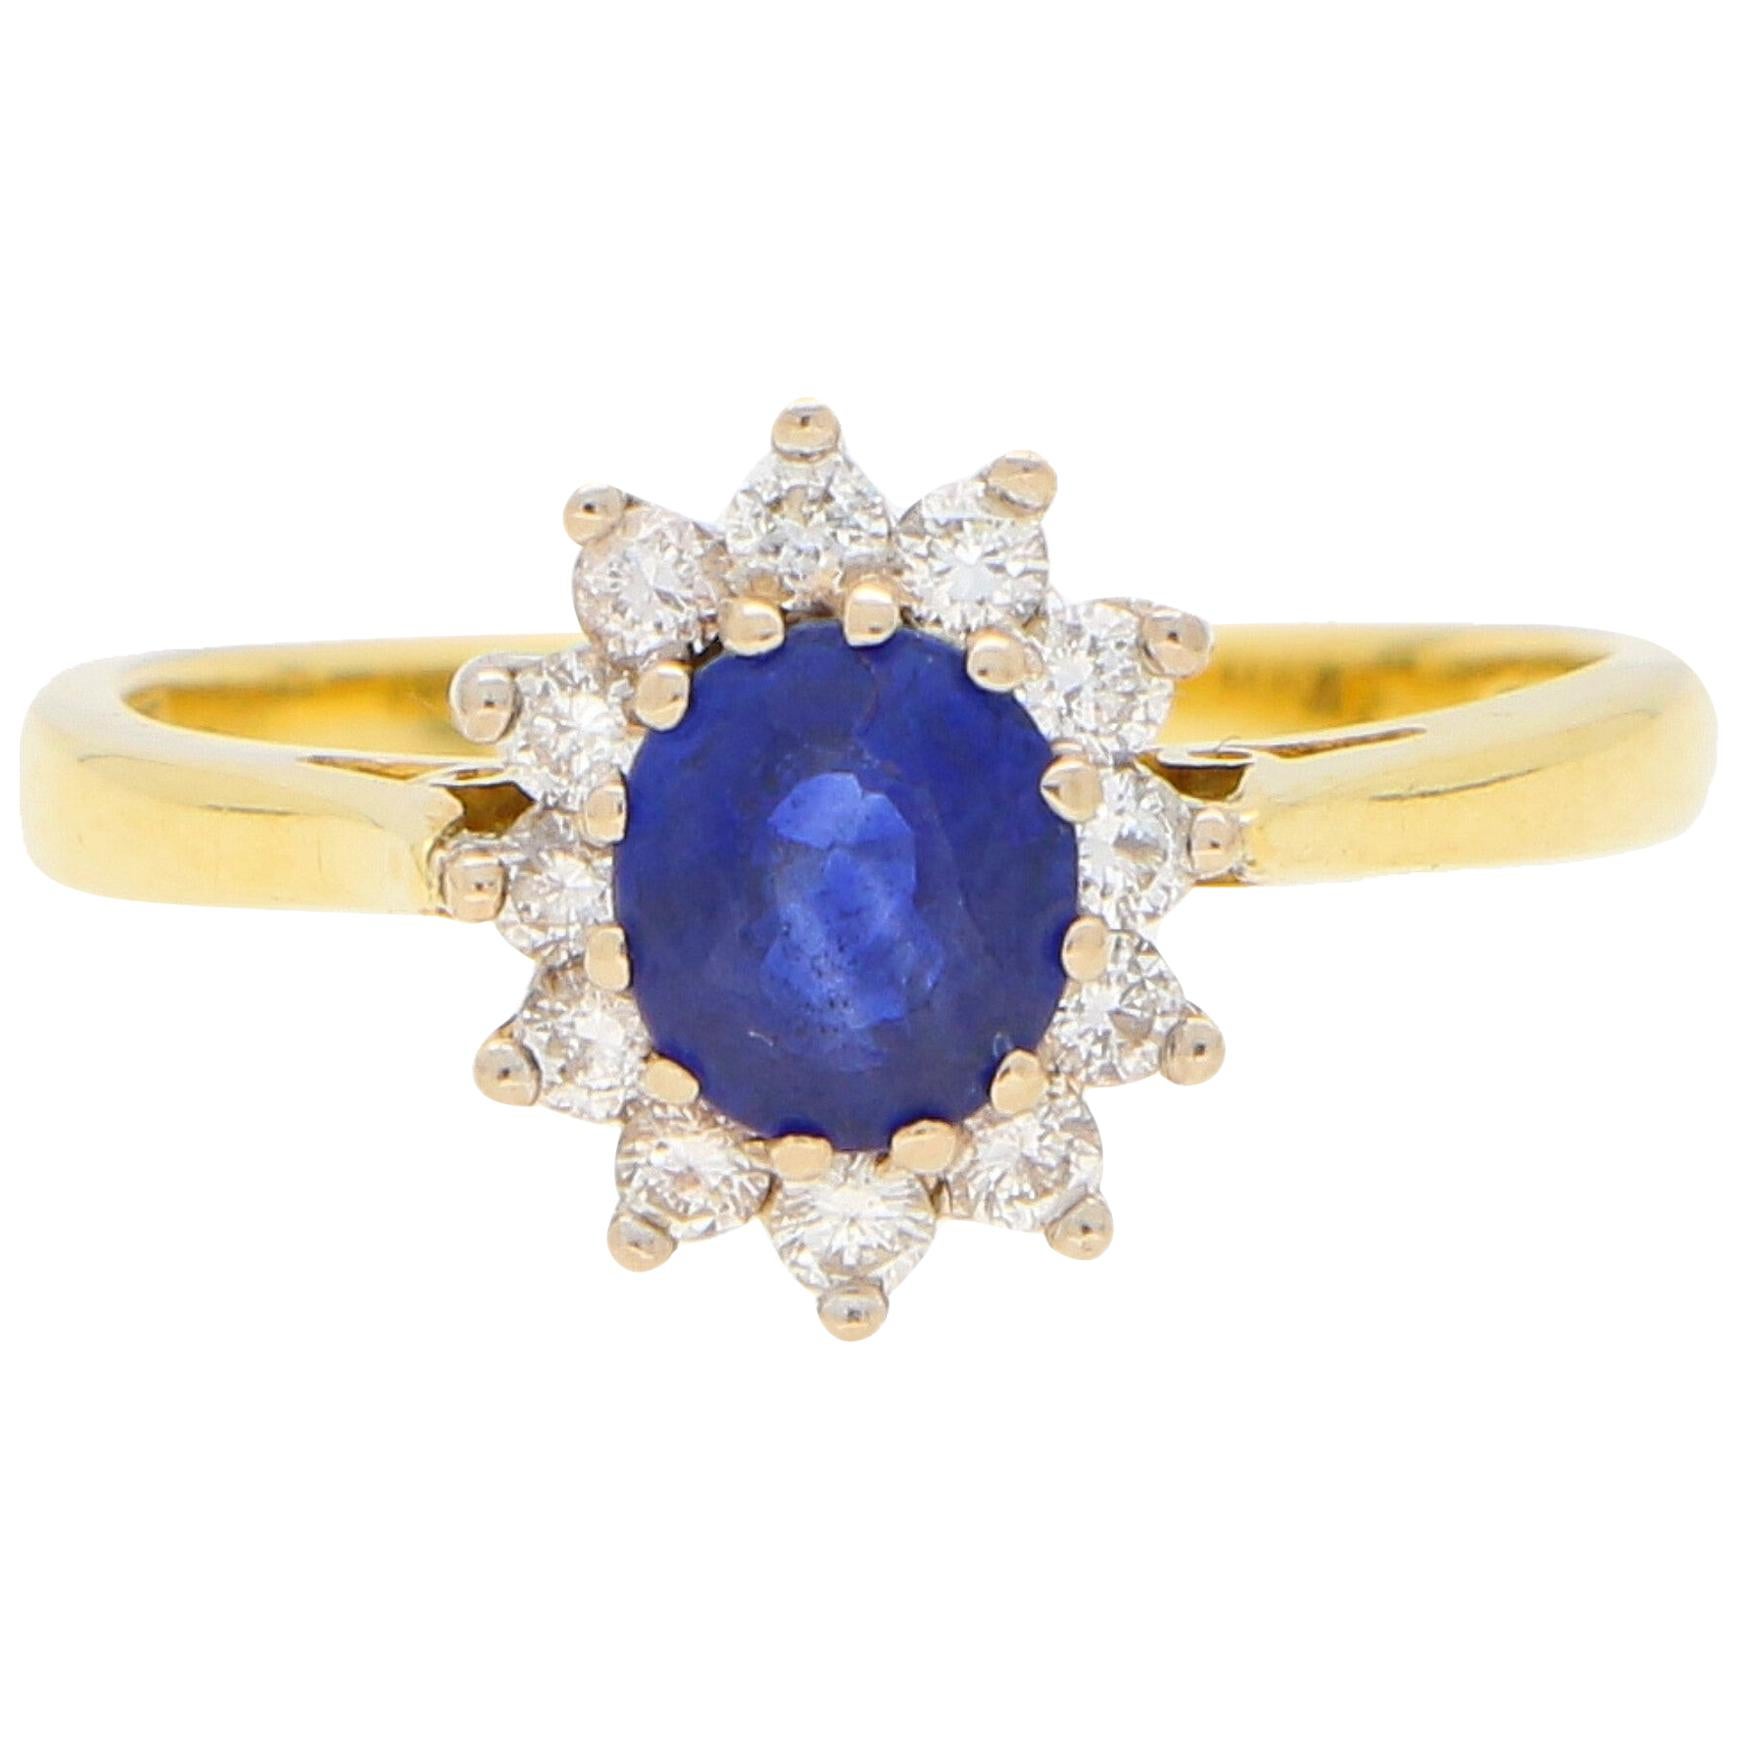 Sapphire and Diamond Cluster Ring Set in 18 Karat Yellow and White Gold